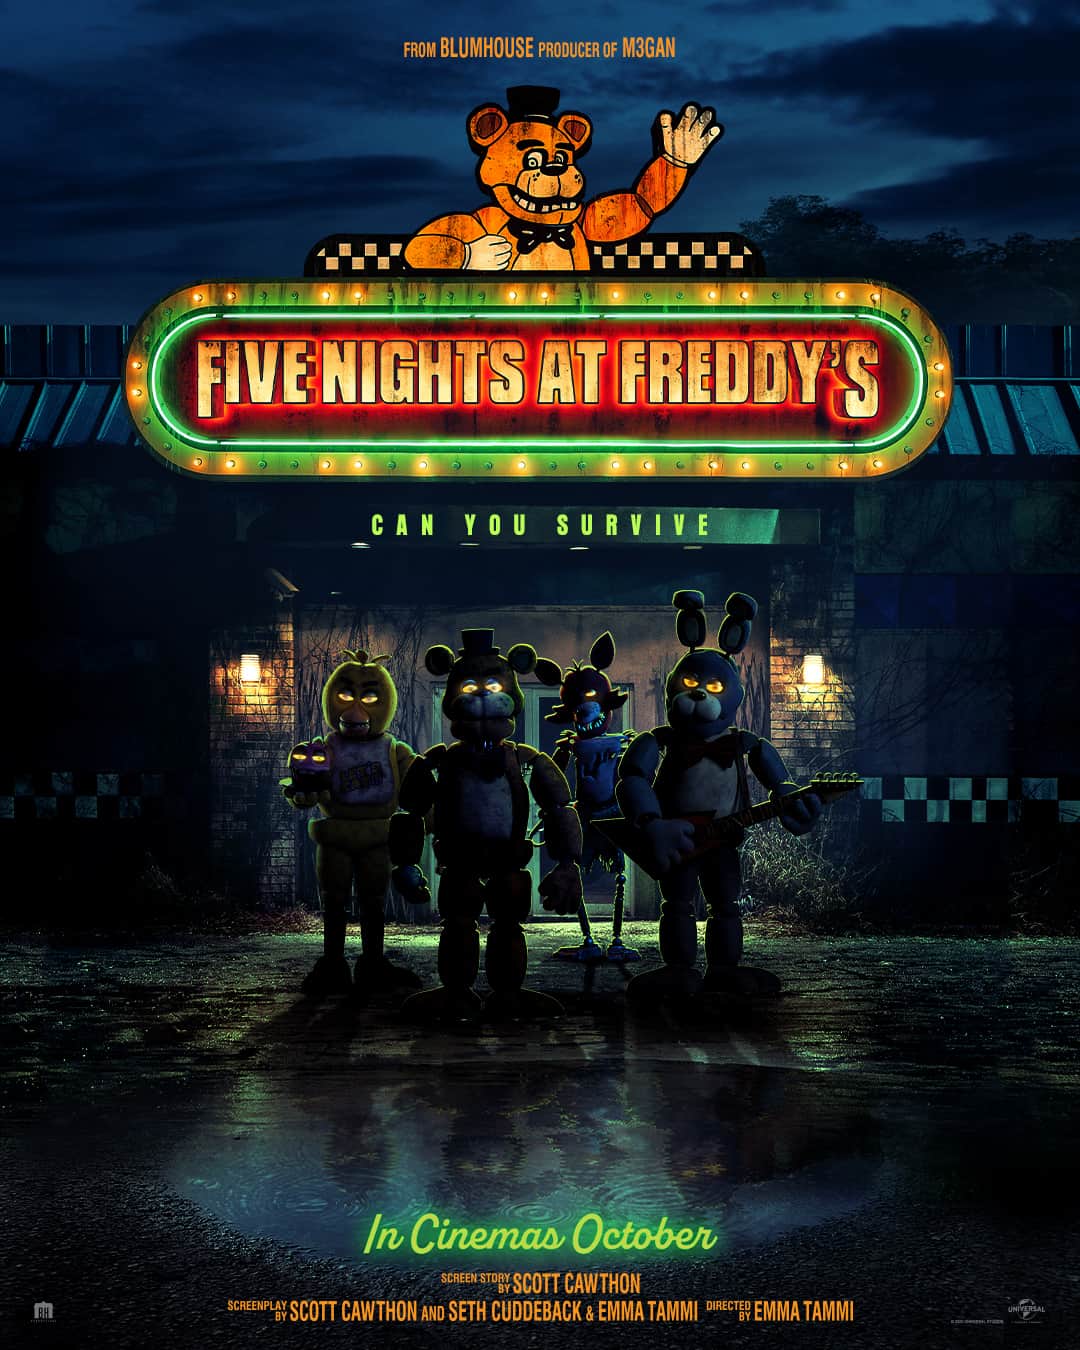 Five Nights at Freddy’s movie gets a behind-the-scenes featurette, director discusses PG-13 rating